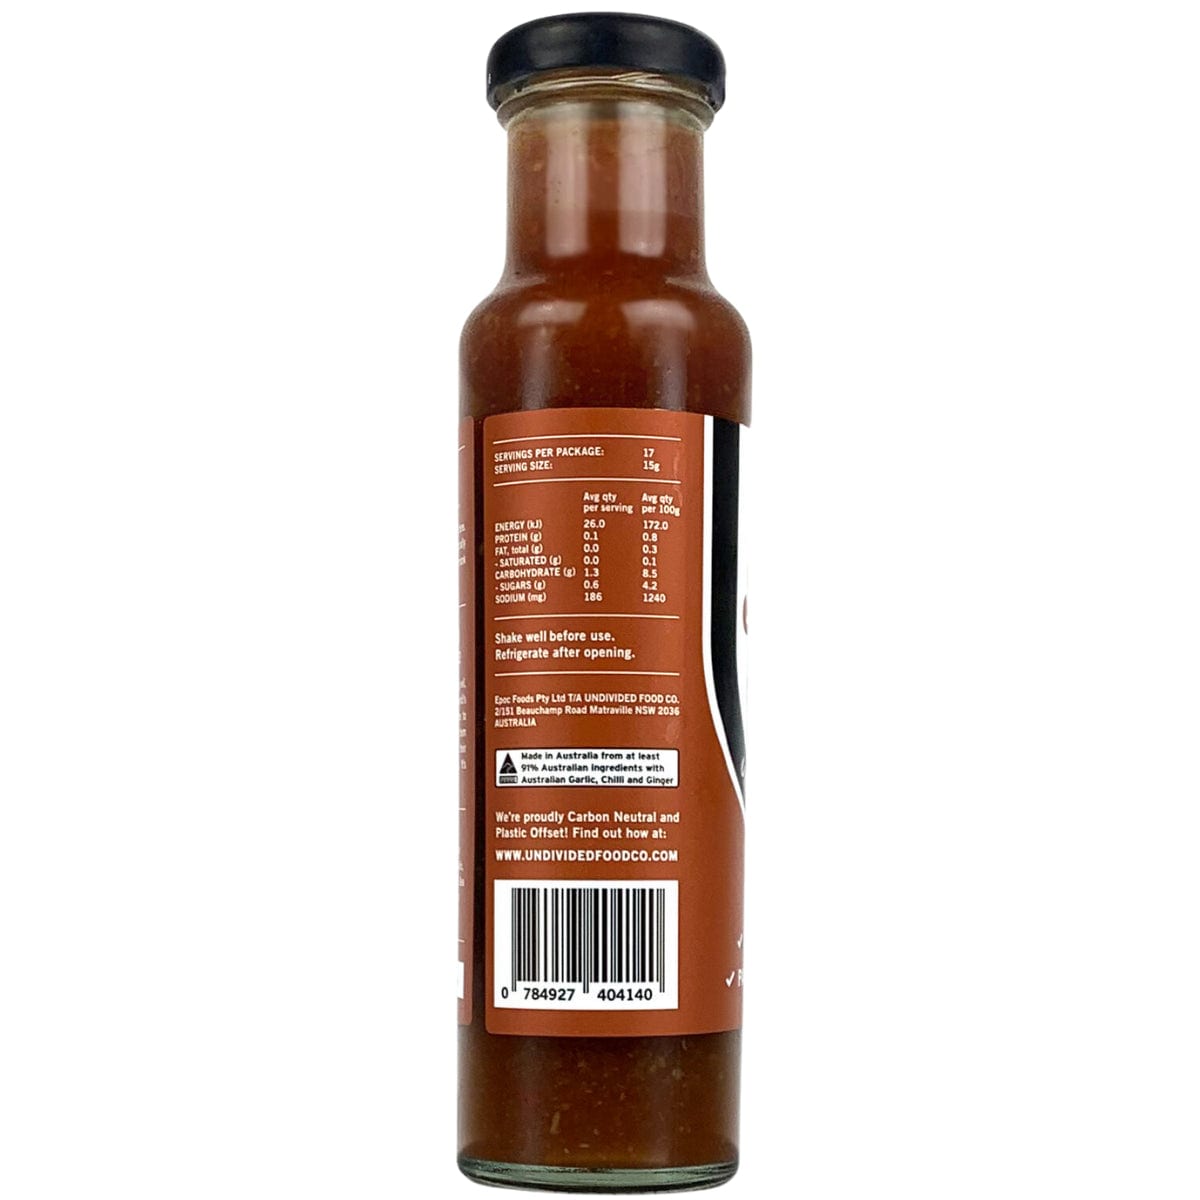 Undivided Food Co GOOD Sauce Sweet Chilli 260g